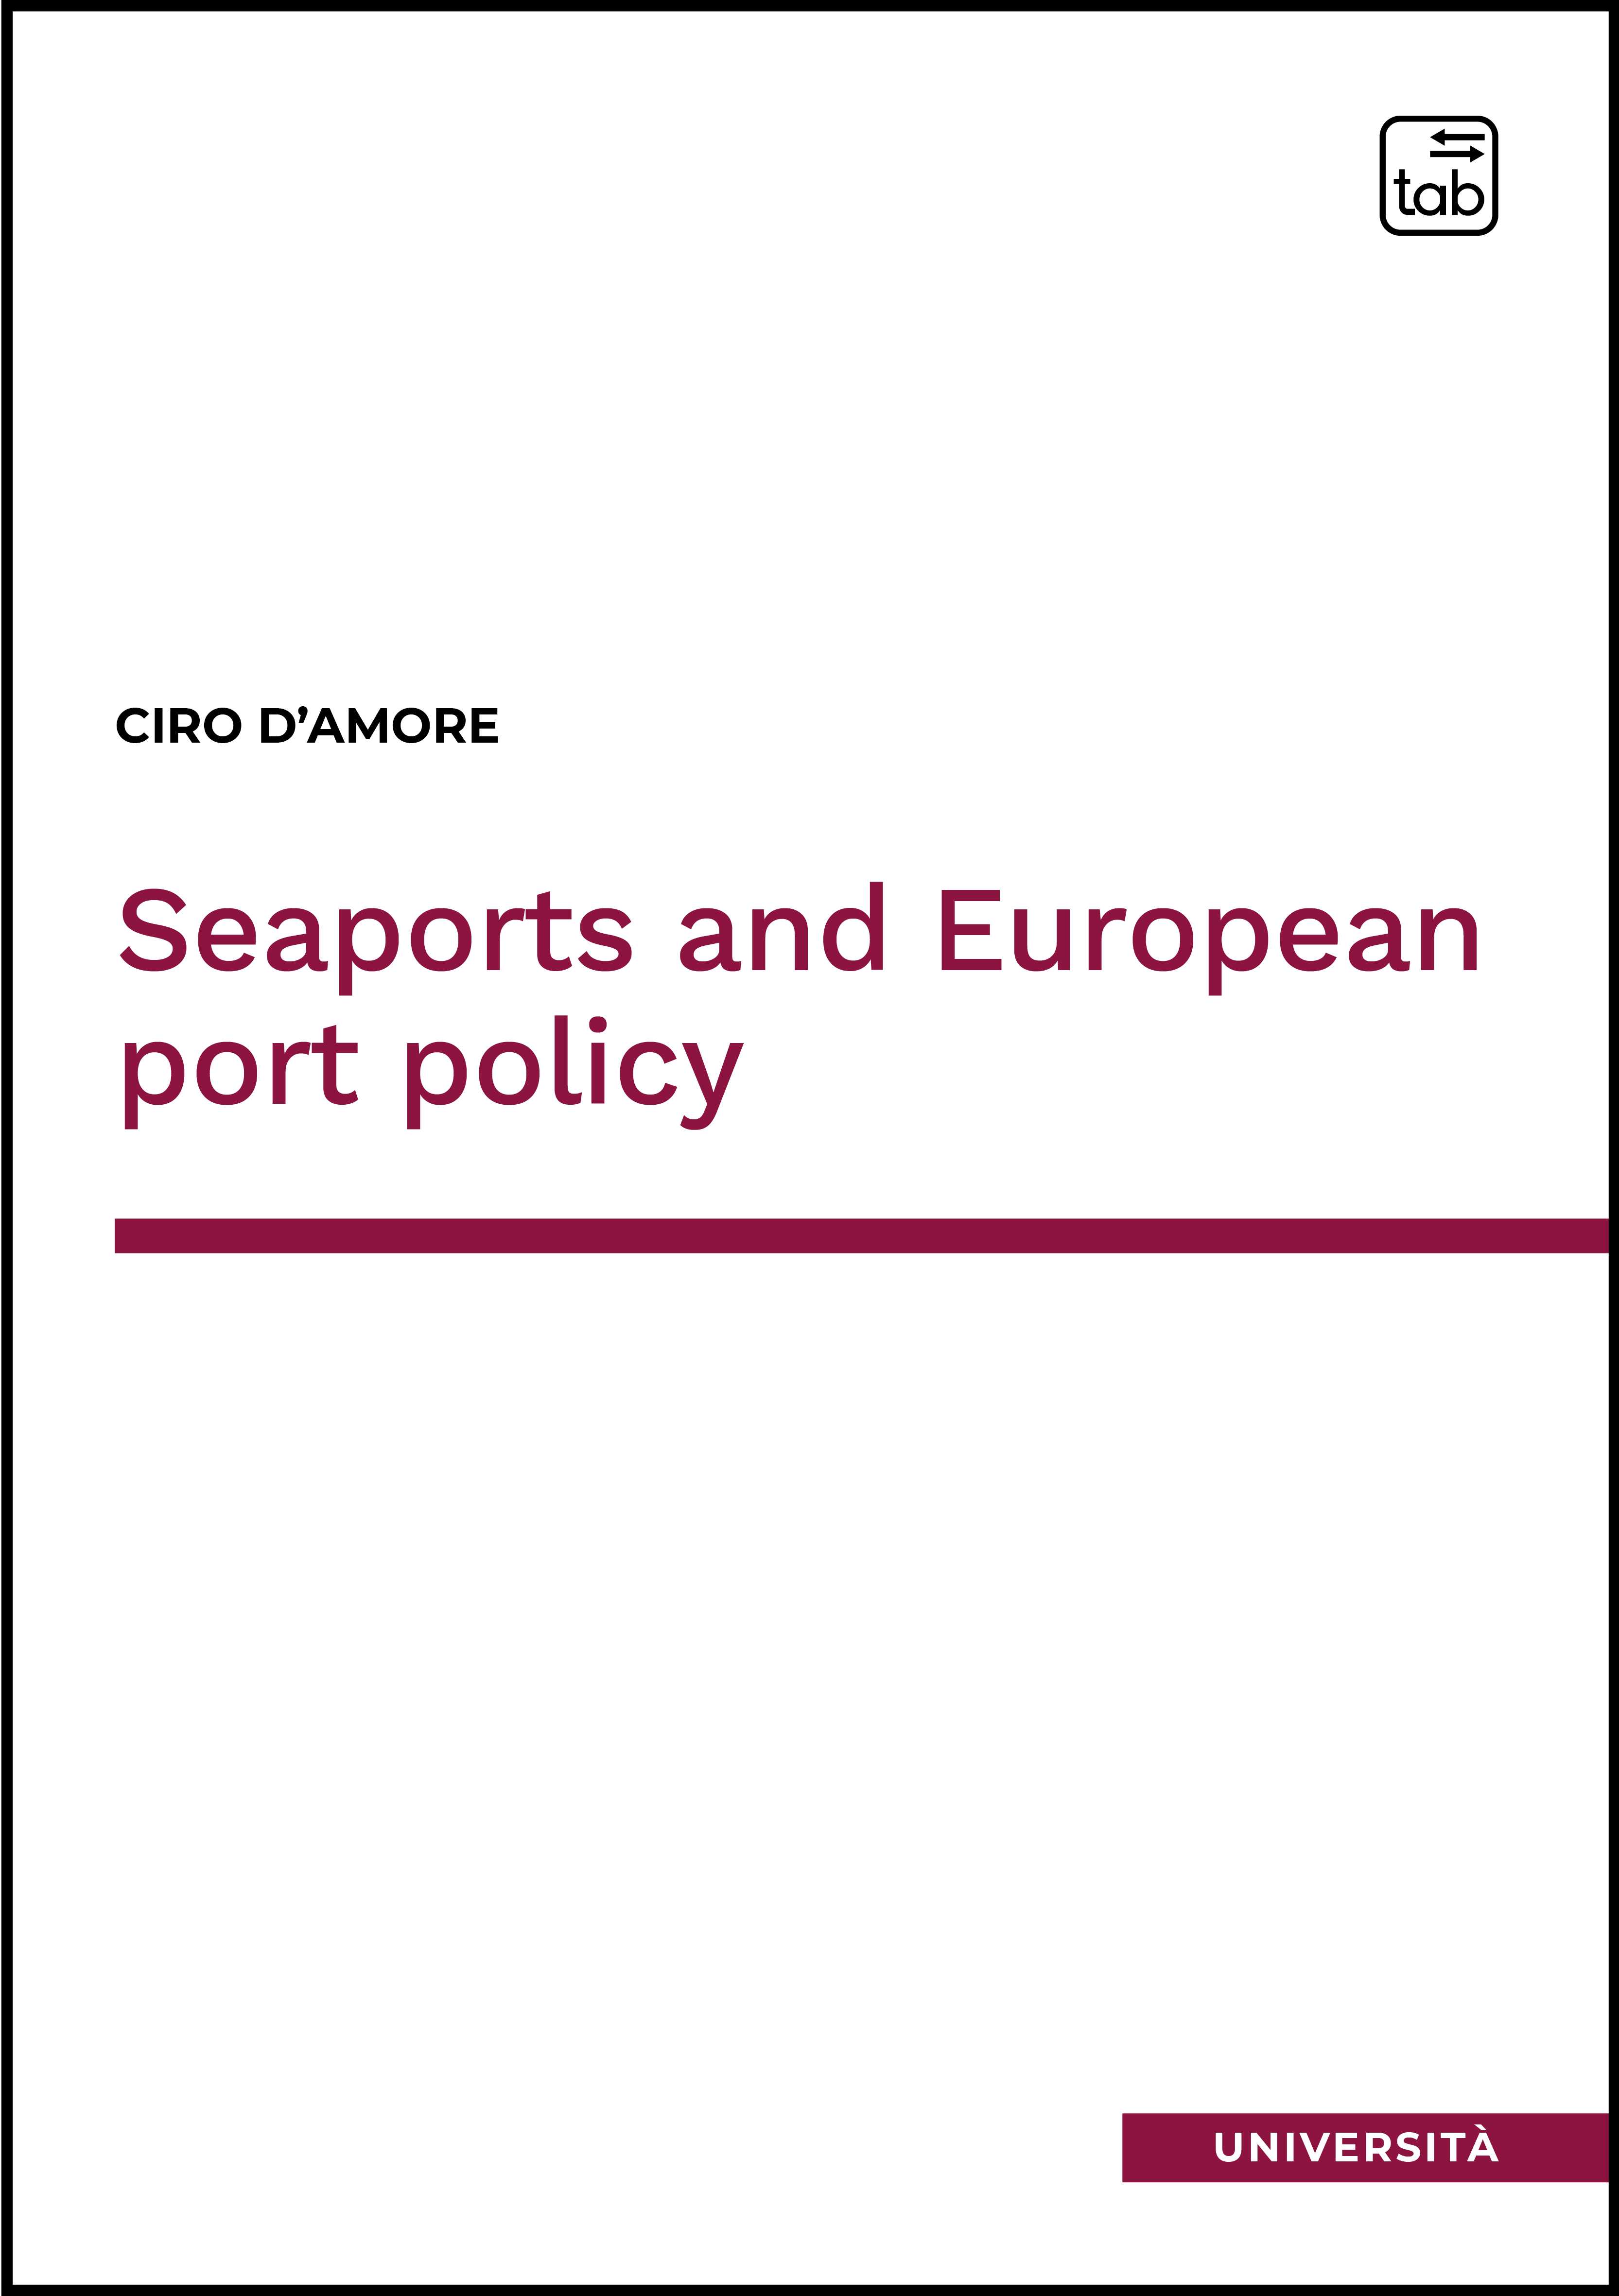 Seaports and European port policy